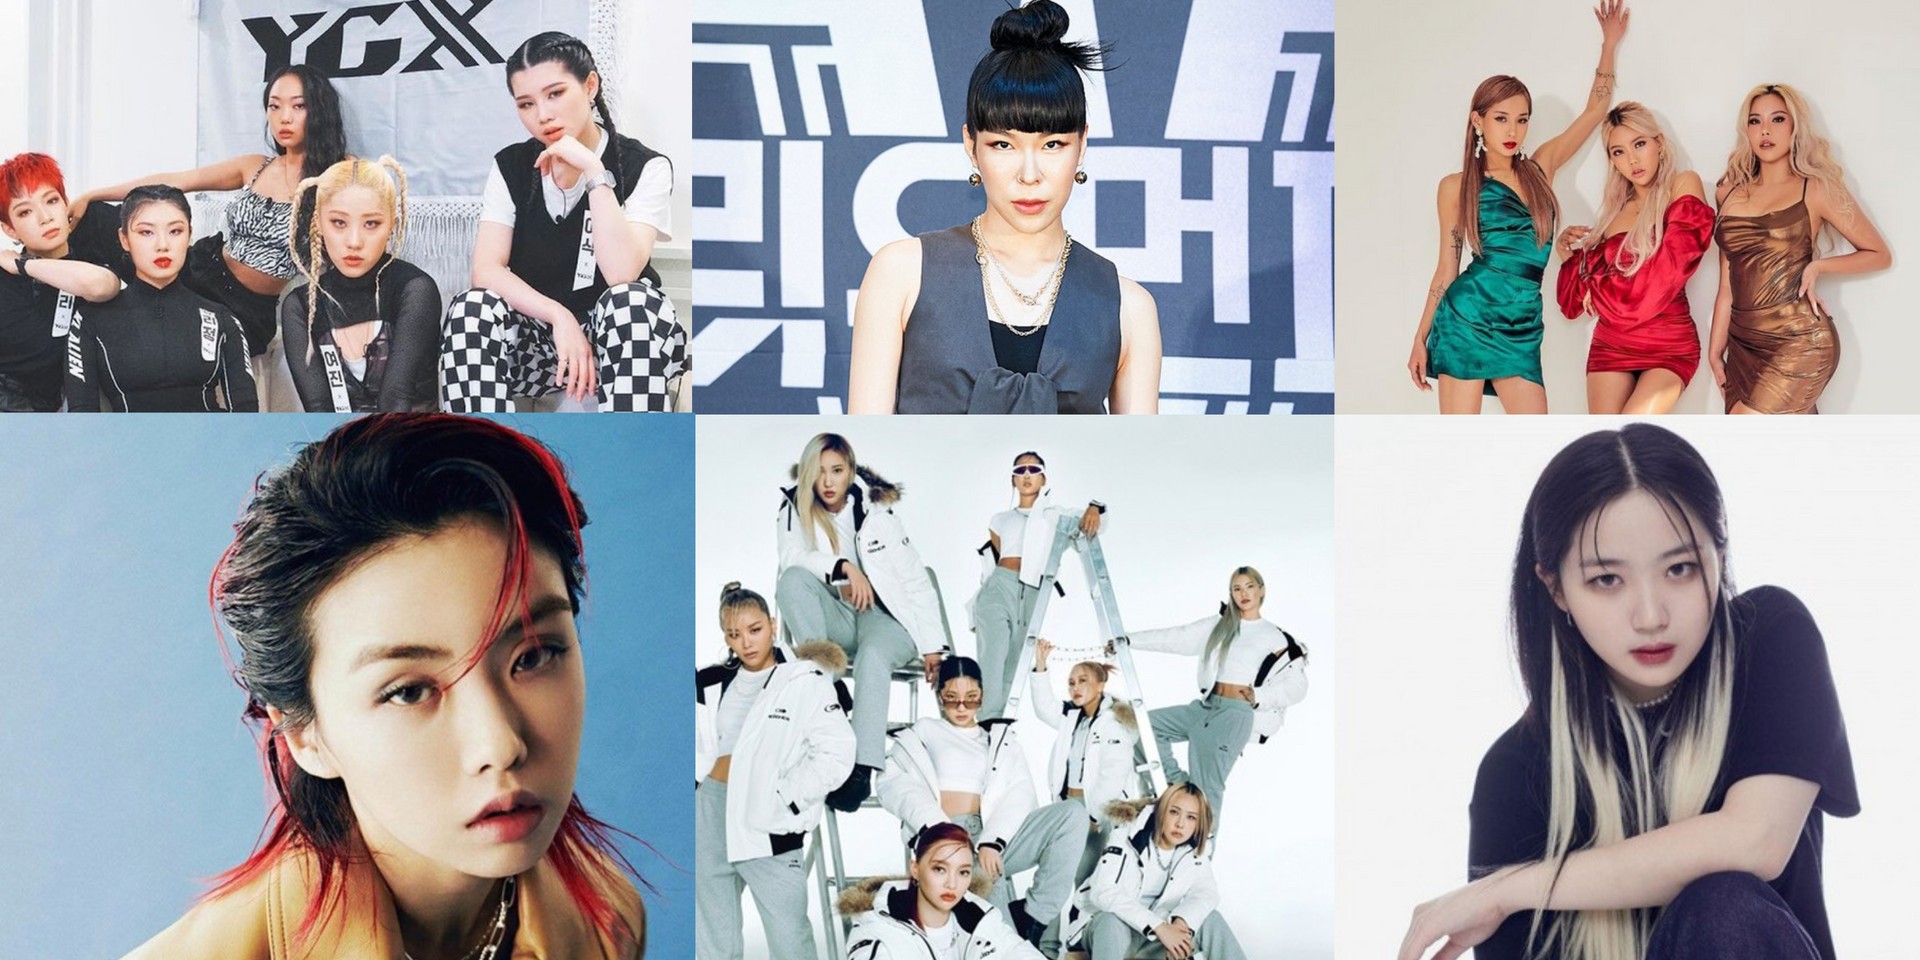 6 YouTube channels from 'Street Dance Girls Fighter' and 'Street Woman Fighter' dancers to check out — TURNS' Jo Nain, WANT's Hyojin Choi, HolyBang, YGX, and more